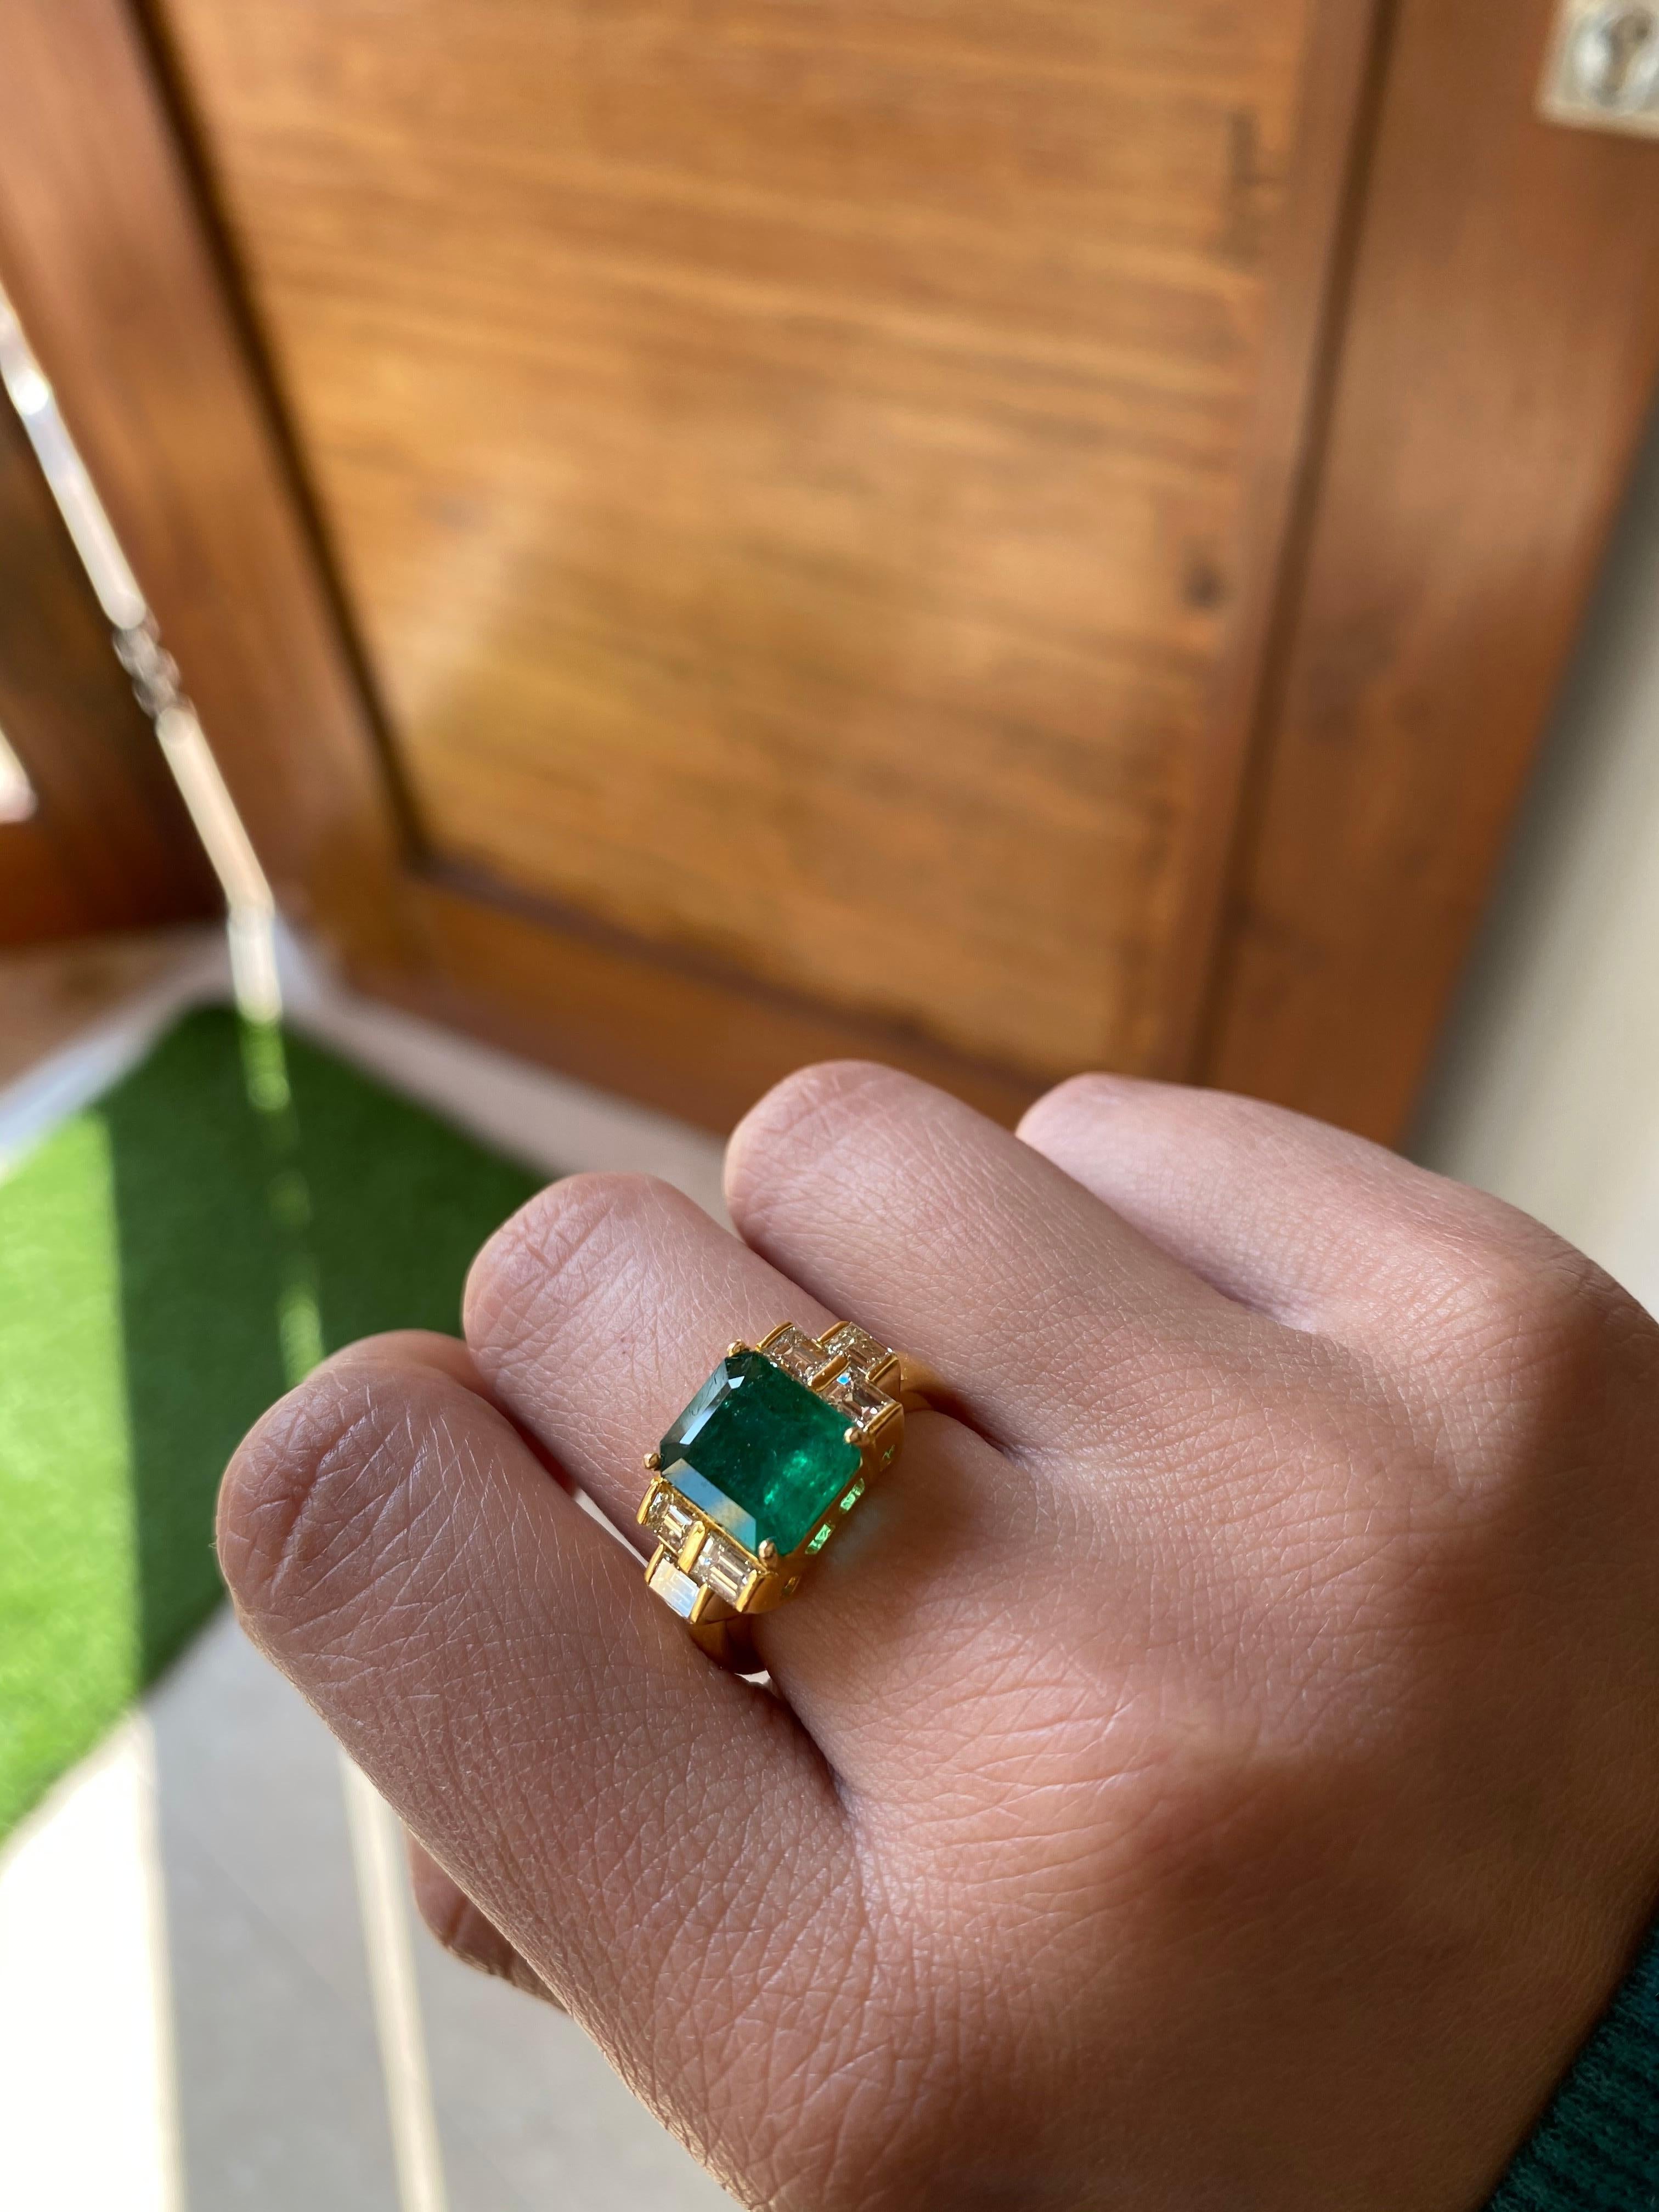 A beautiful and simple natural emerald and diamond ring set in 18k yellow gold. The natural emerald weight is 3.25 carats and natural diamond weight is .95 carats. The net gold weight of the ring is 6.002 grams and ring dimensions in cm 1 x 2 x 2.3